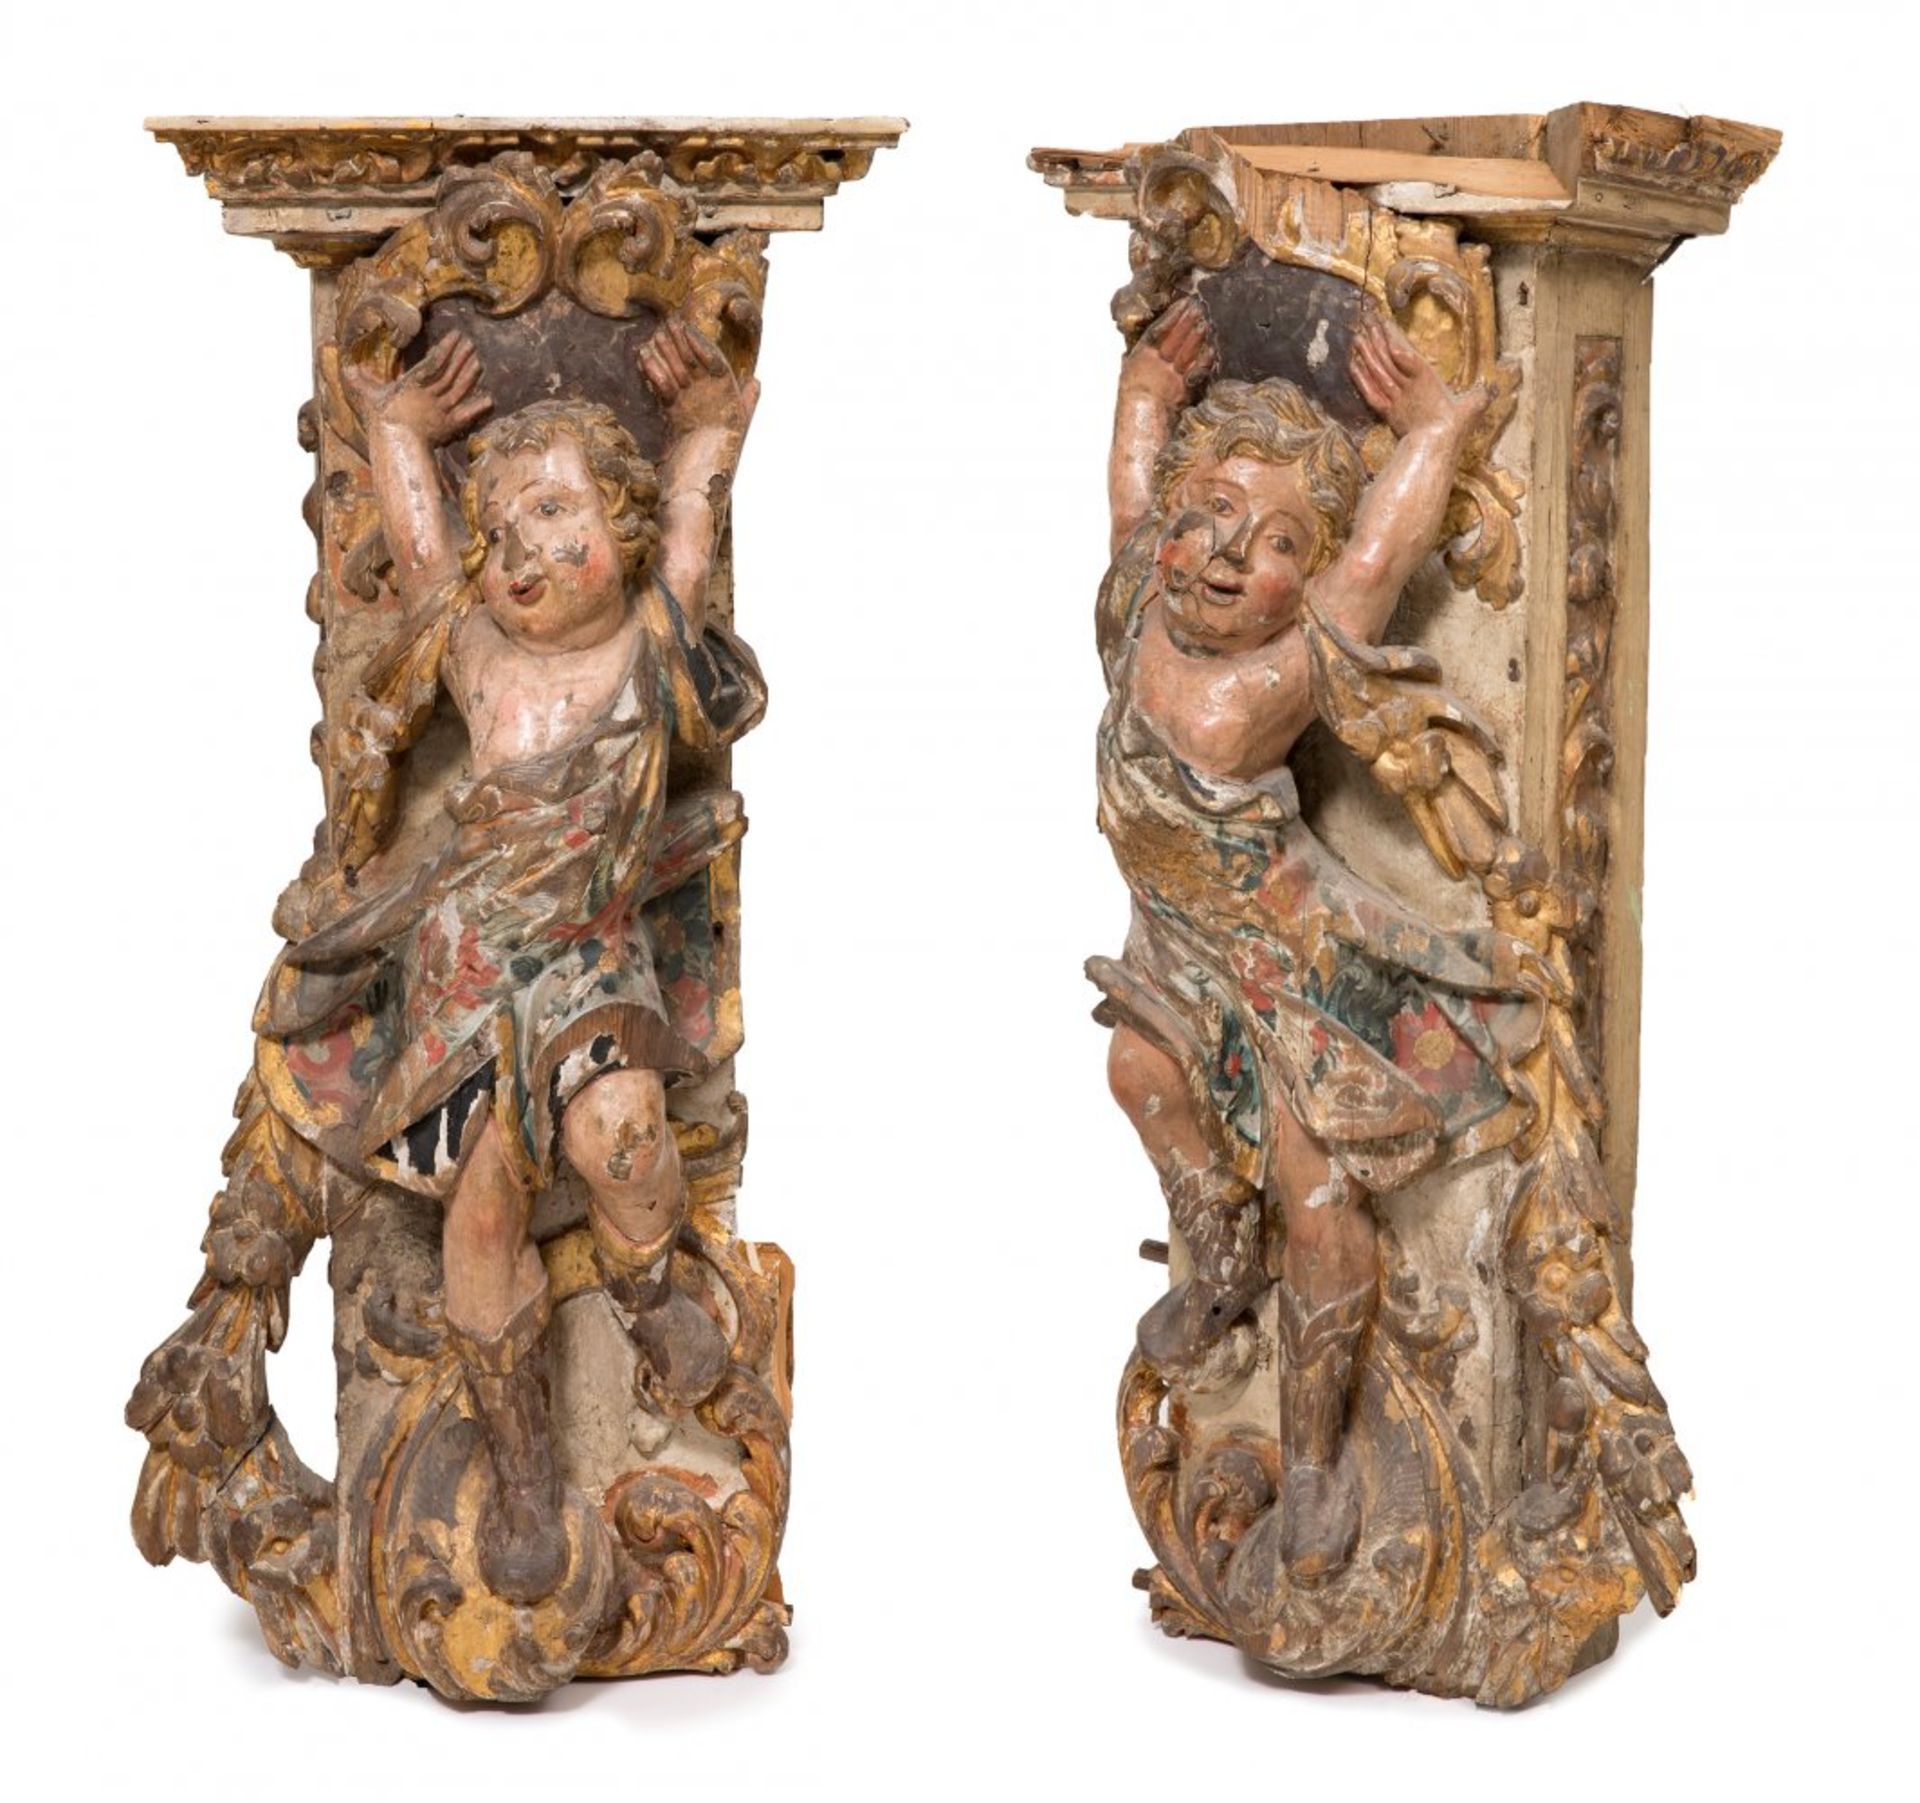 Early 18th century Spanish work.Pair of pilasters with angels.Carved, gilded and polychrome wood. - Image 2 of 6